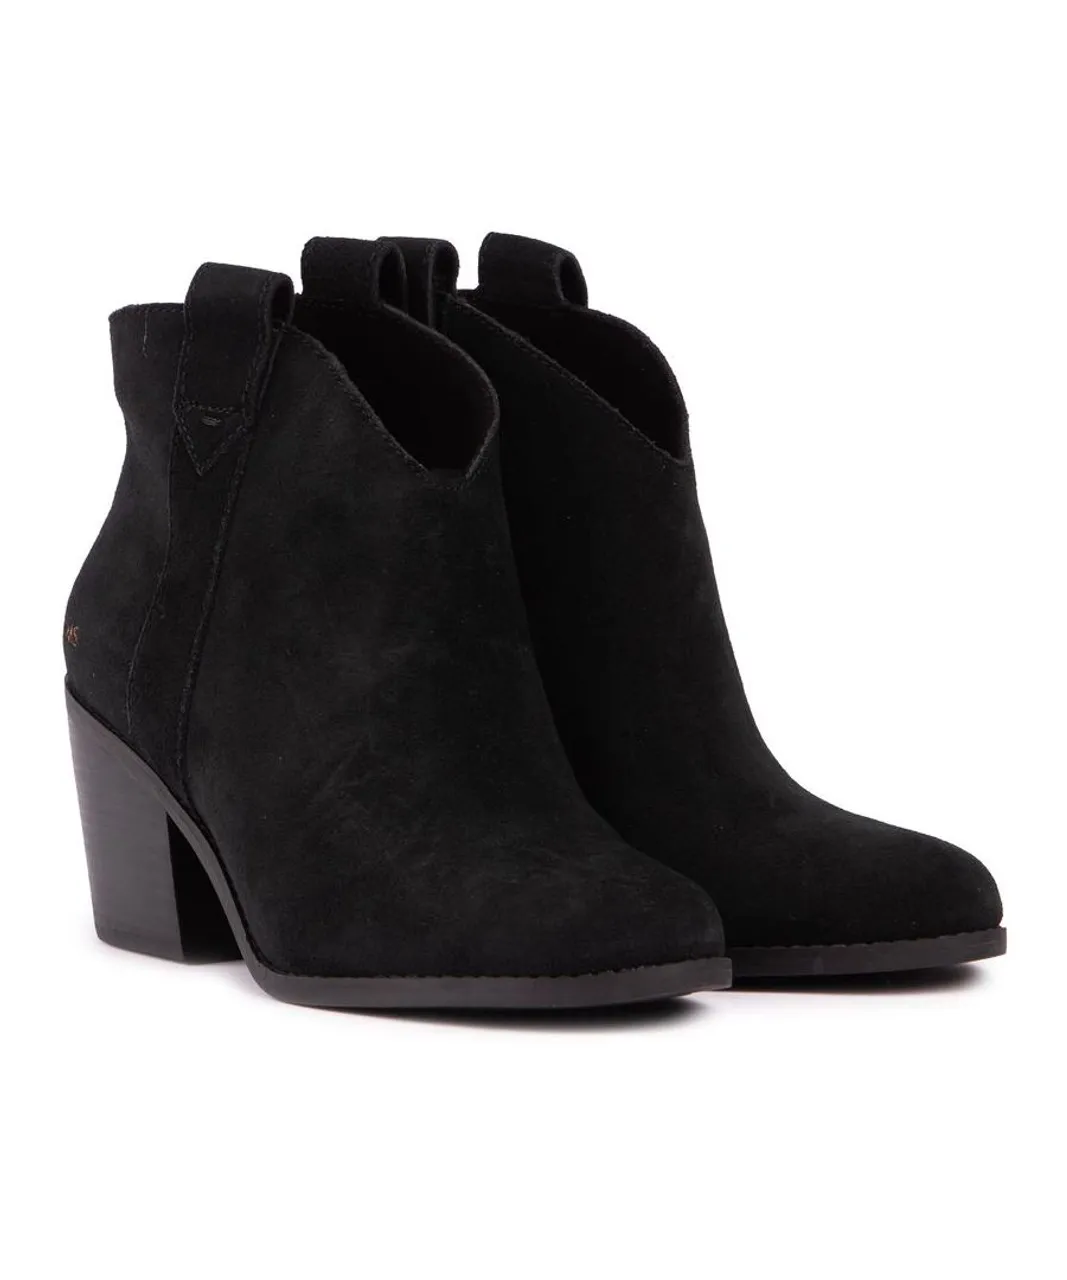 Toms Womens Constance Boots - Black